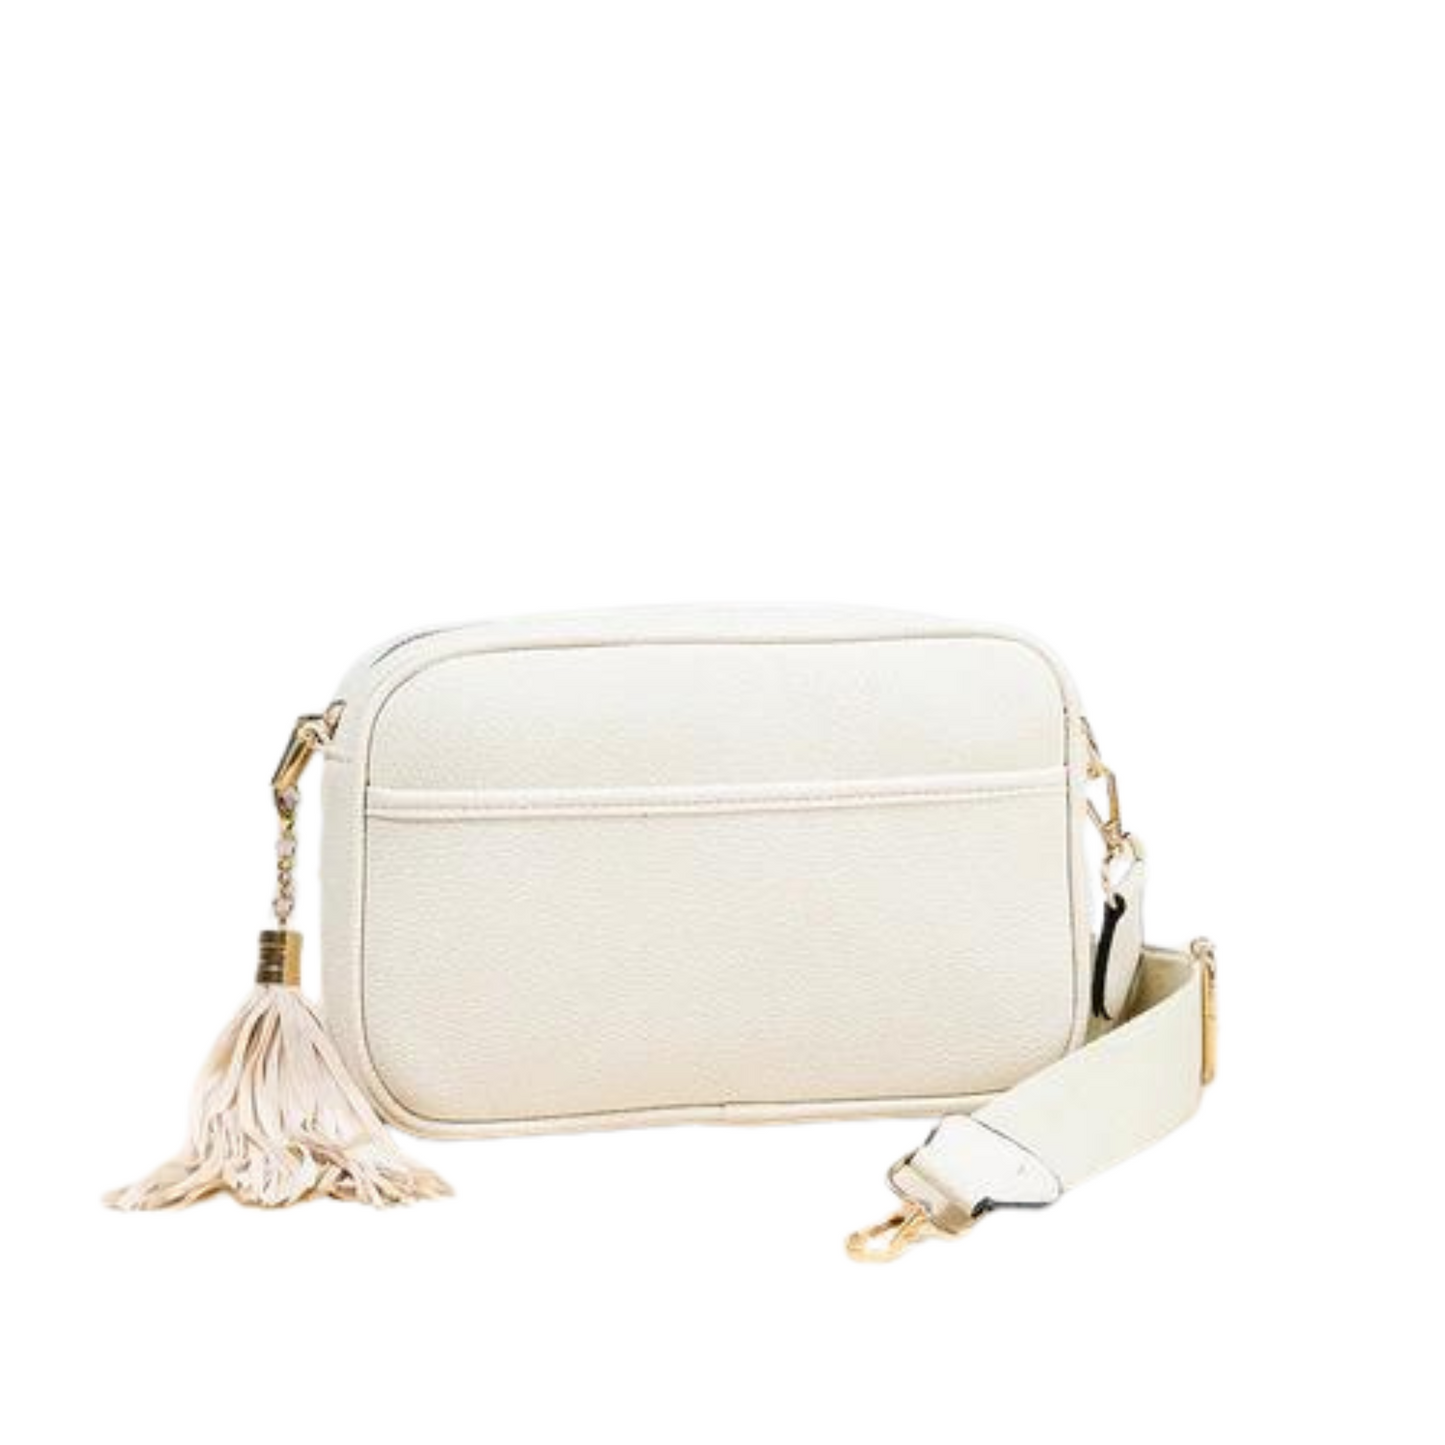 Stay stylish with the Tassel Camera Crossbody. Boasting a tassel accent and adjustable strap, this bag is available in four&nbsp;sophisticated colors: ivory, nude, light grey and light blue. Keep your belongings safe and secure while looking your best.